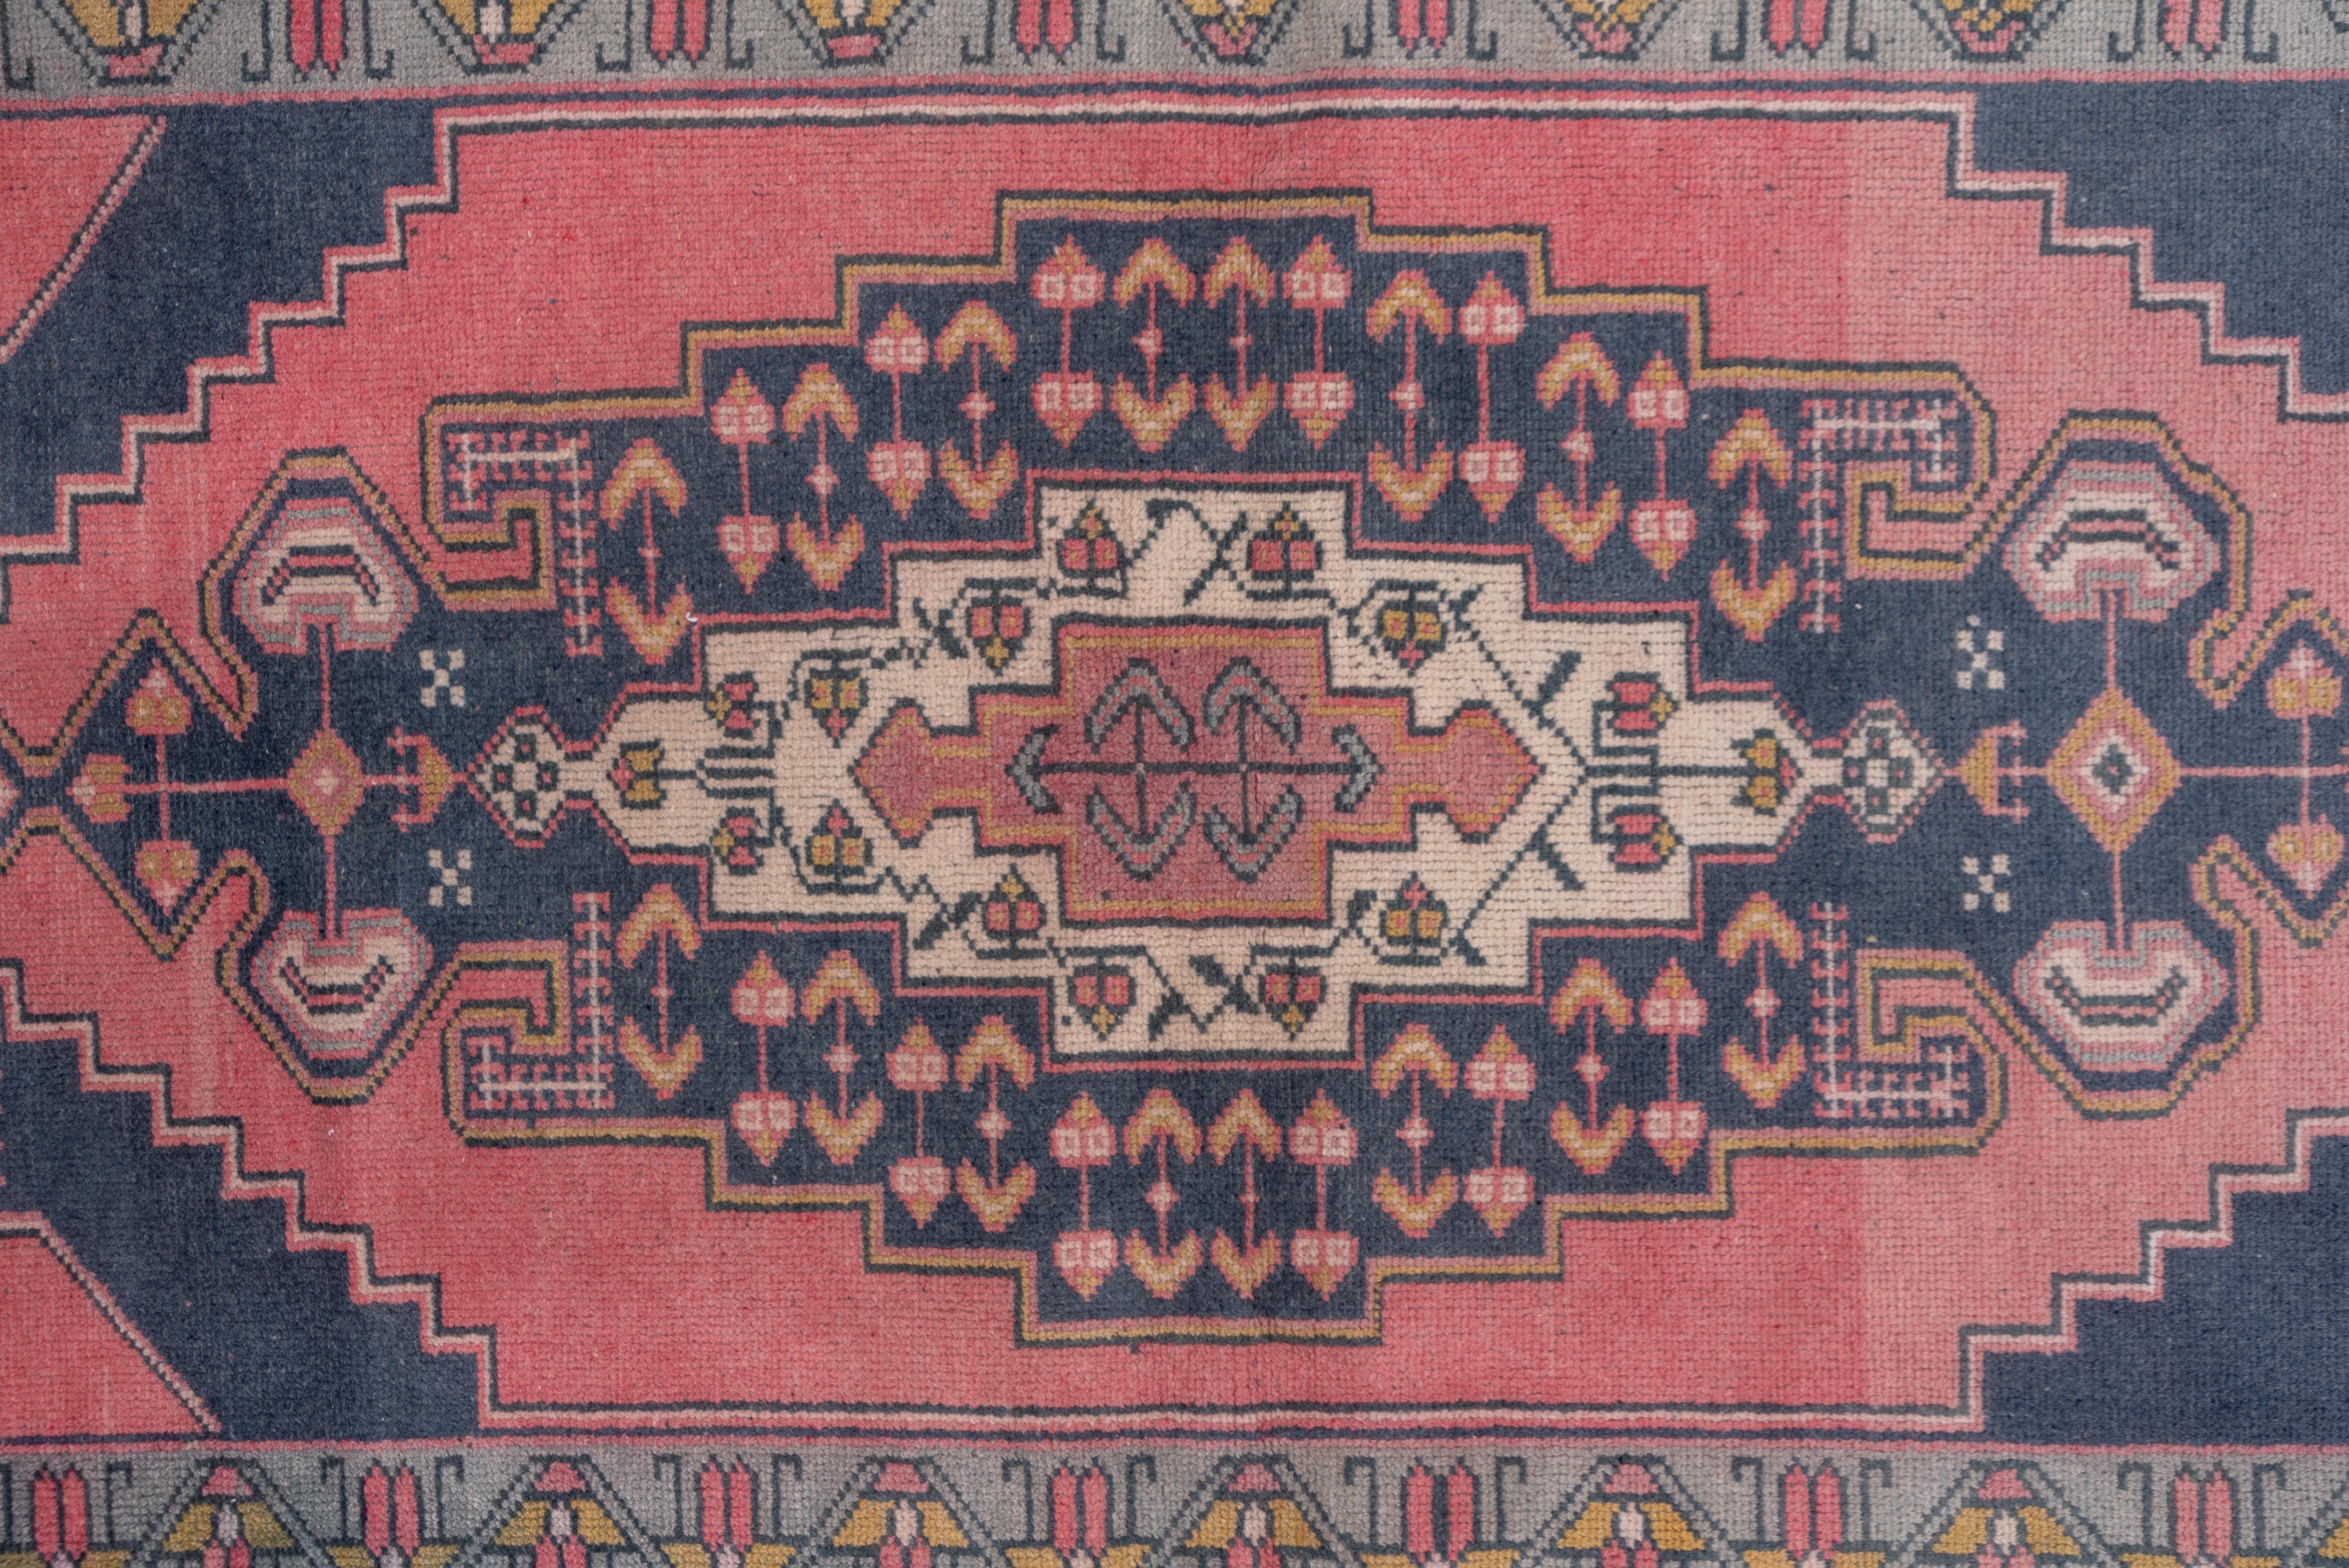 Turkish Colorful Oushak Rug, Pink and Navy Tones